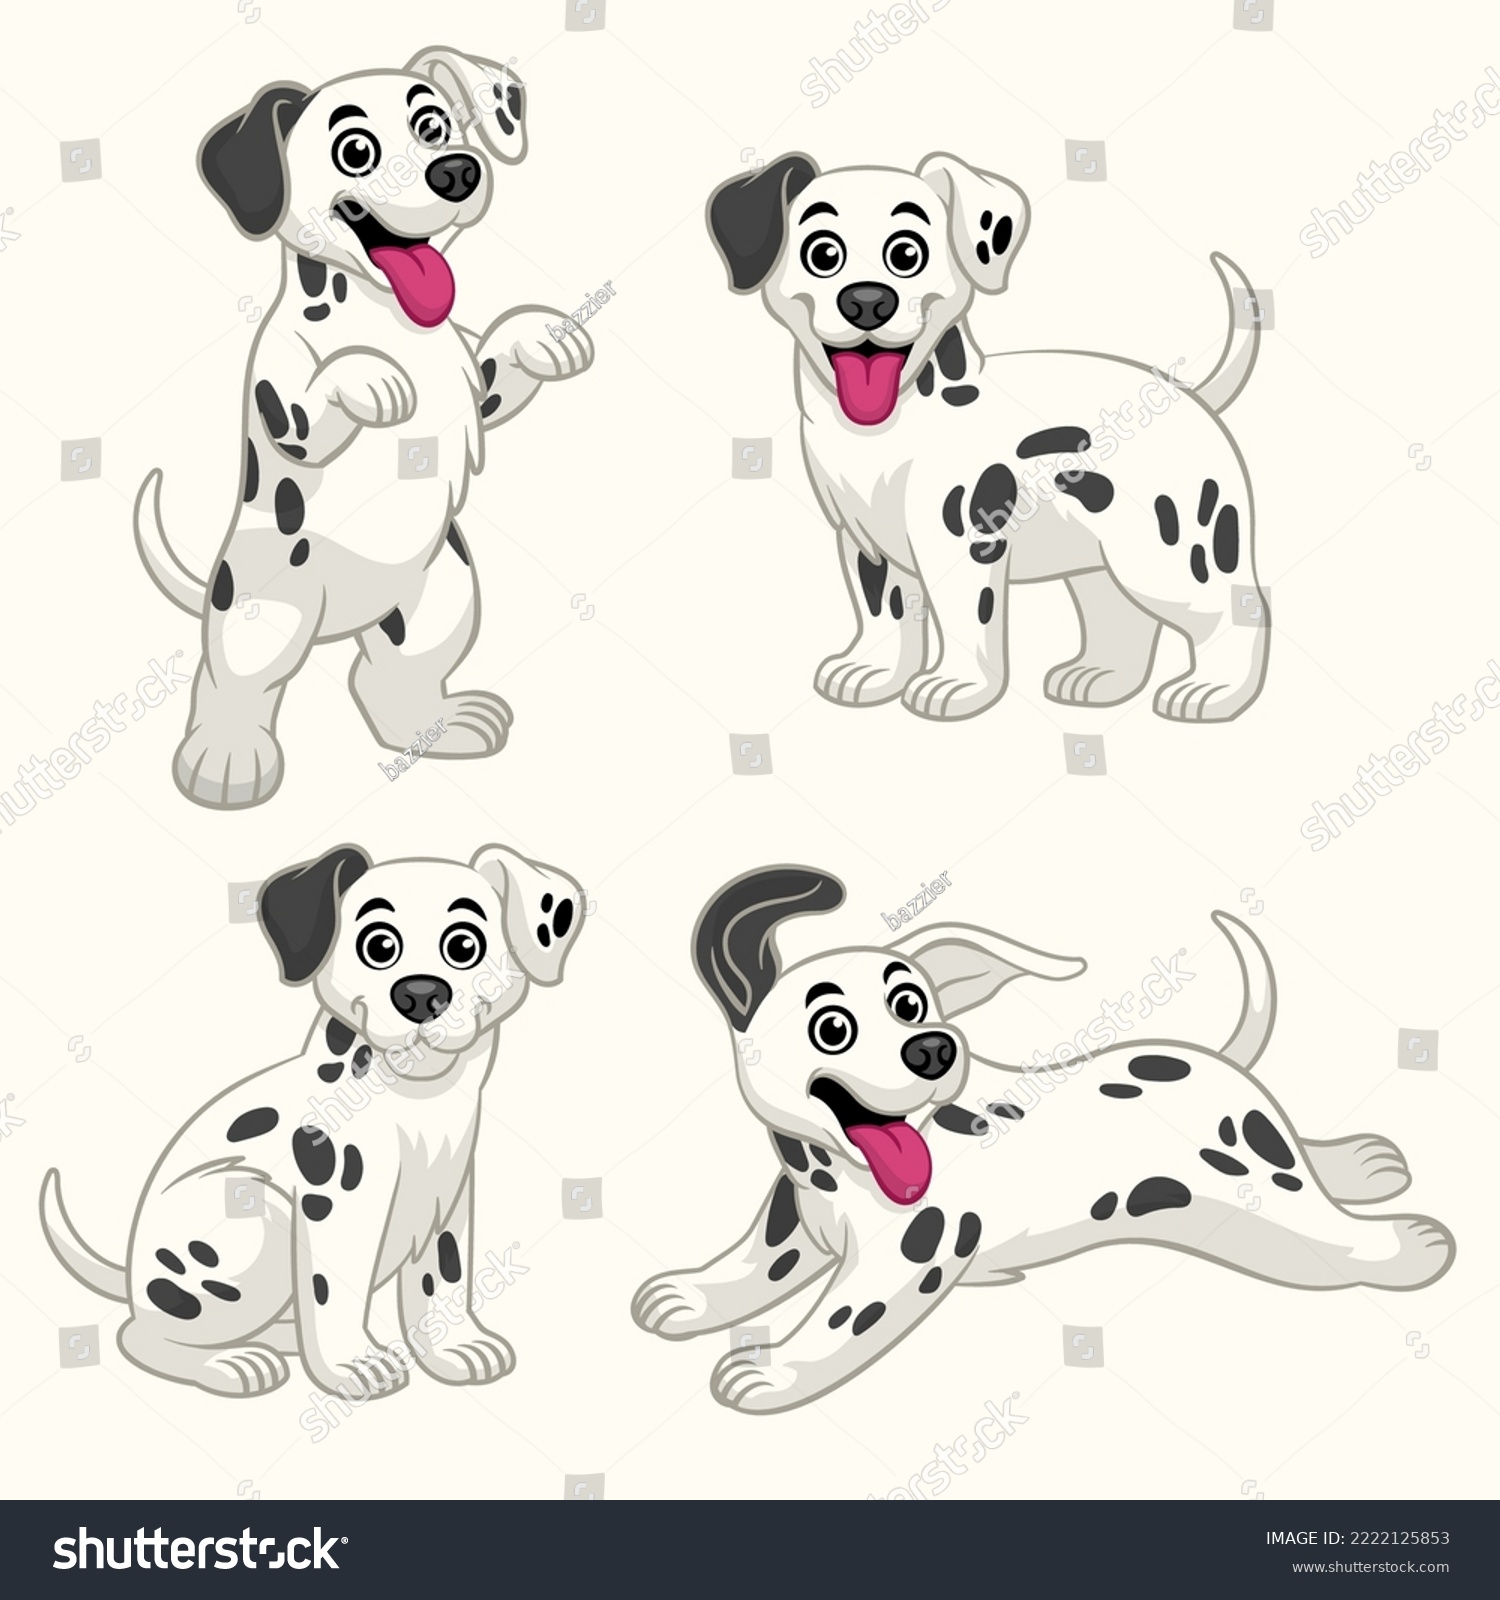 SVG of Cartoon Dalmation Puppy set in various Pose svg